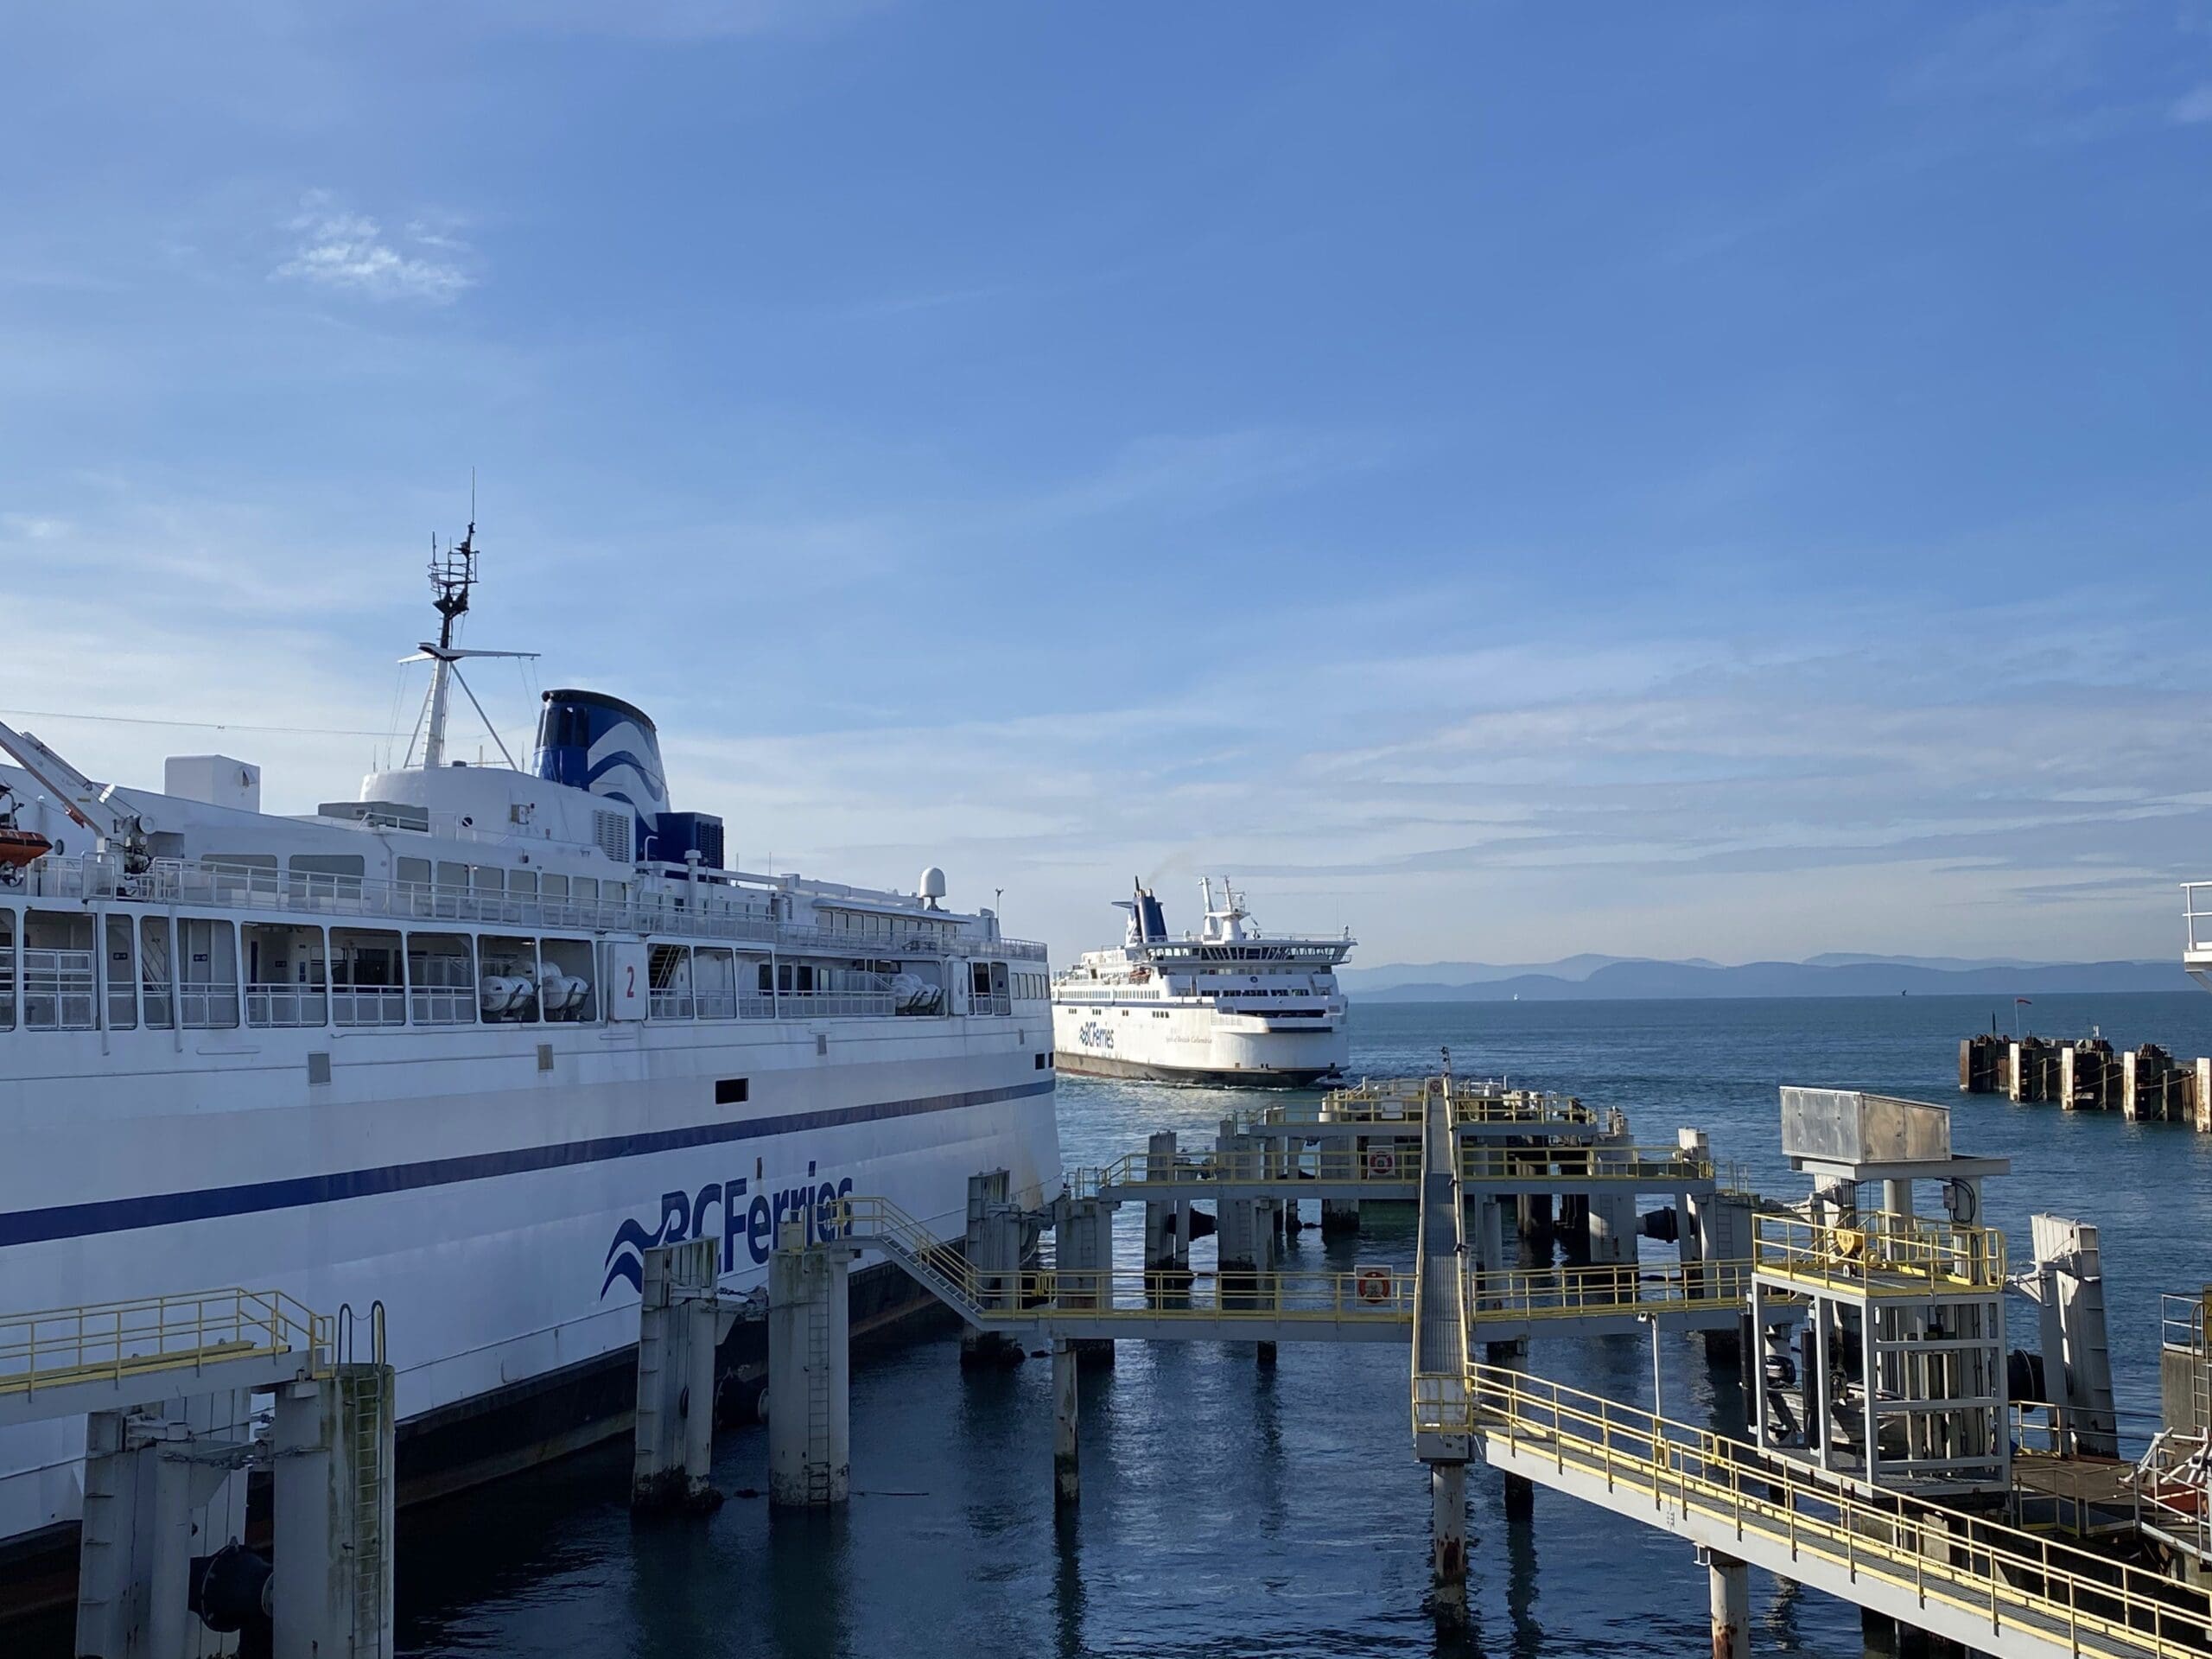 Riding a ferry is a bucket list activity for some people.  Living on an island, riding a ferry is fun and necessary at times.  This is the BC ferries terminal.